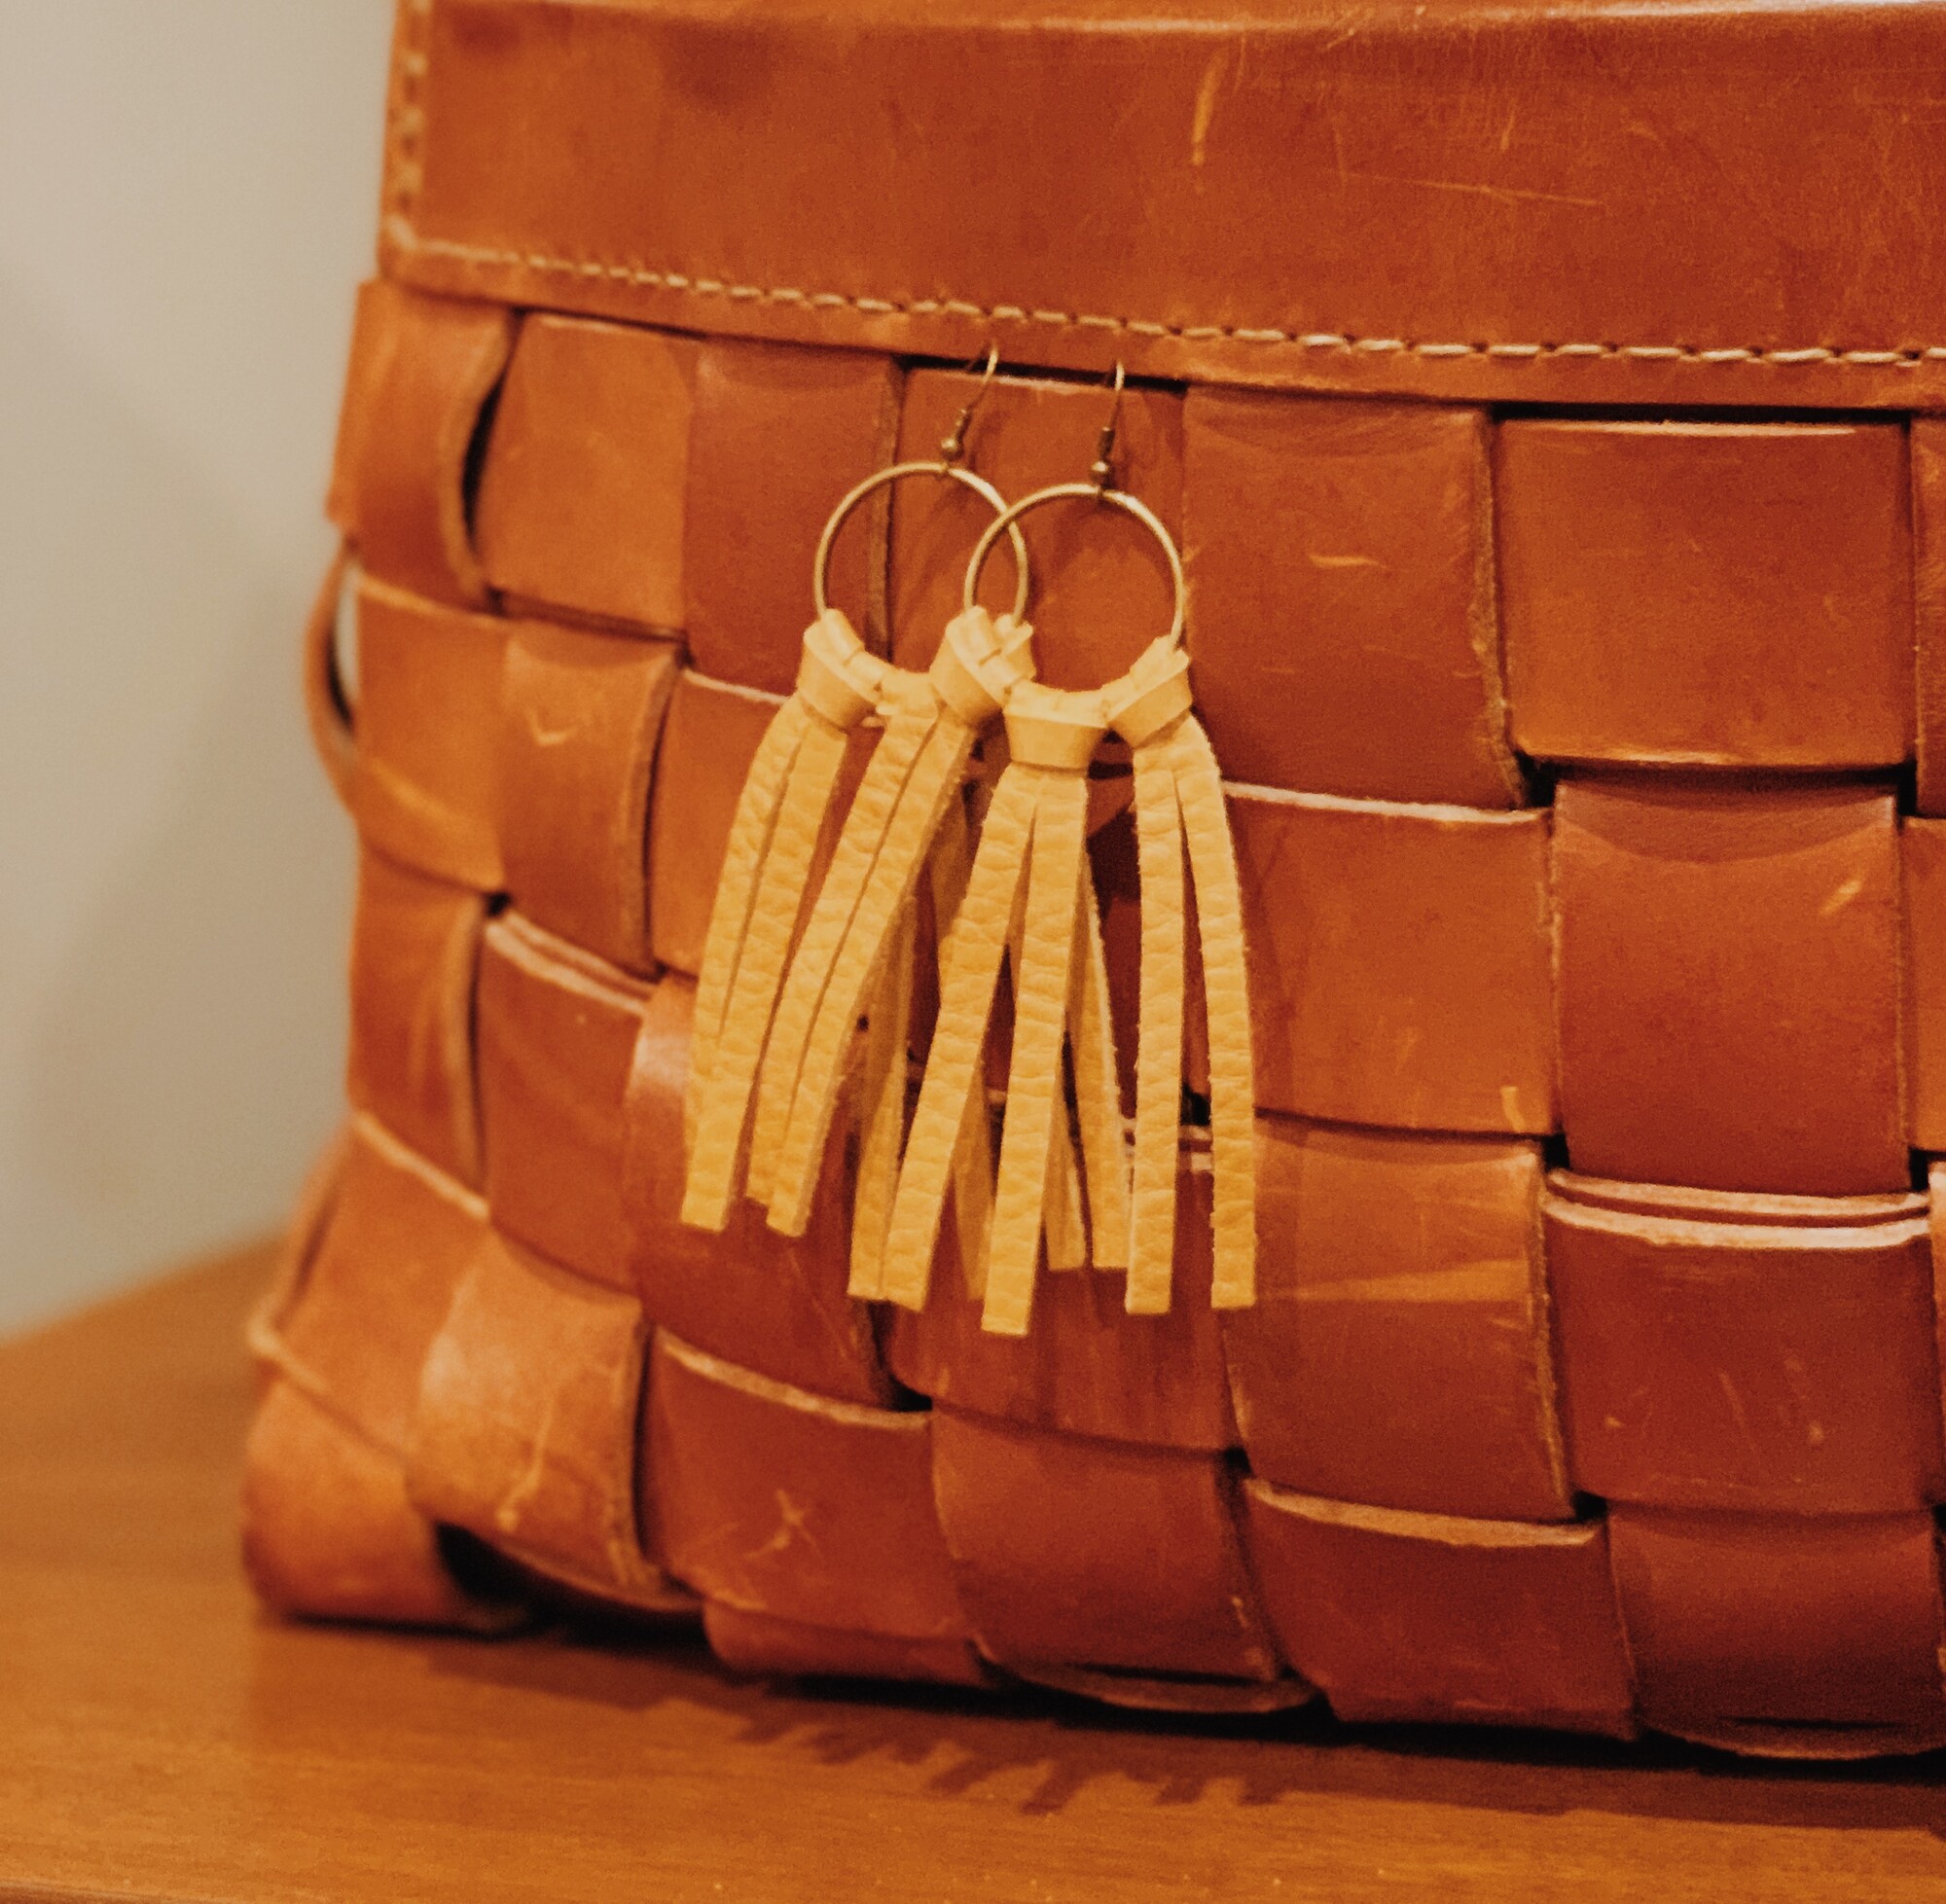 These genuine leather earrings from The Olive Branch were carefully designed and hand crafted! They measure 4.5 inches long.